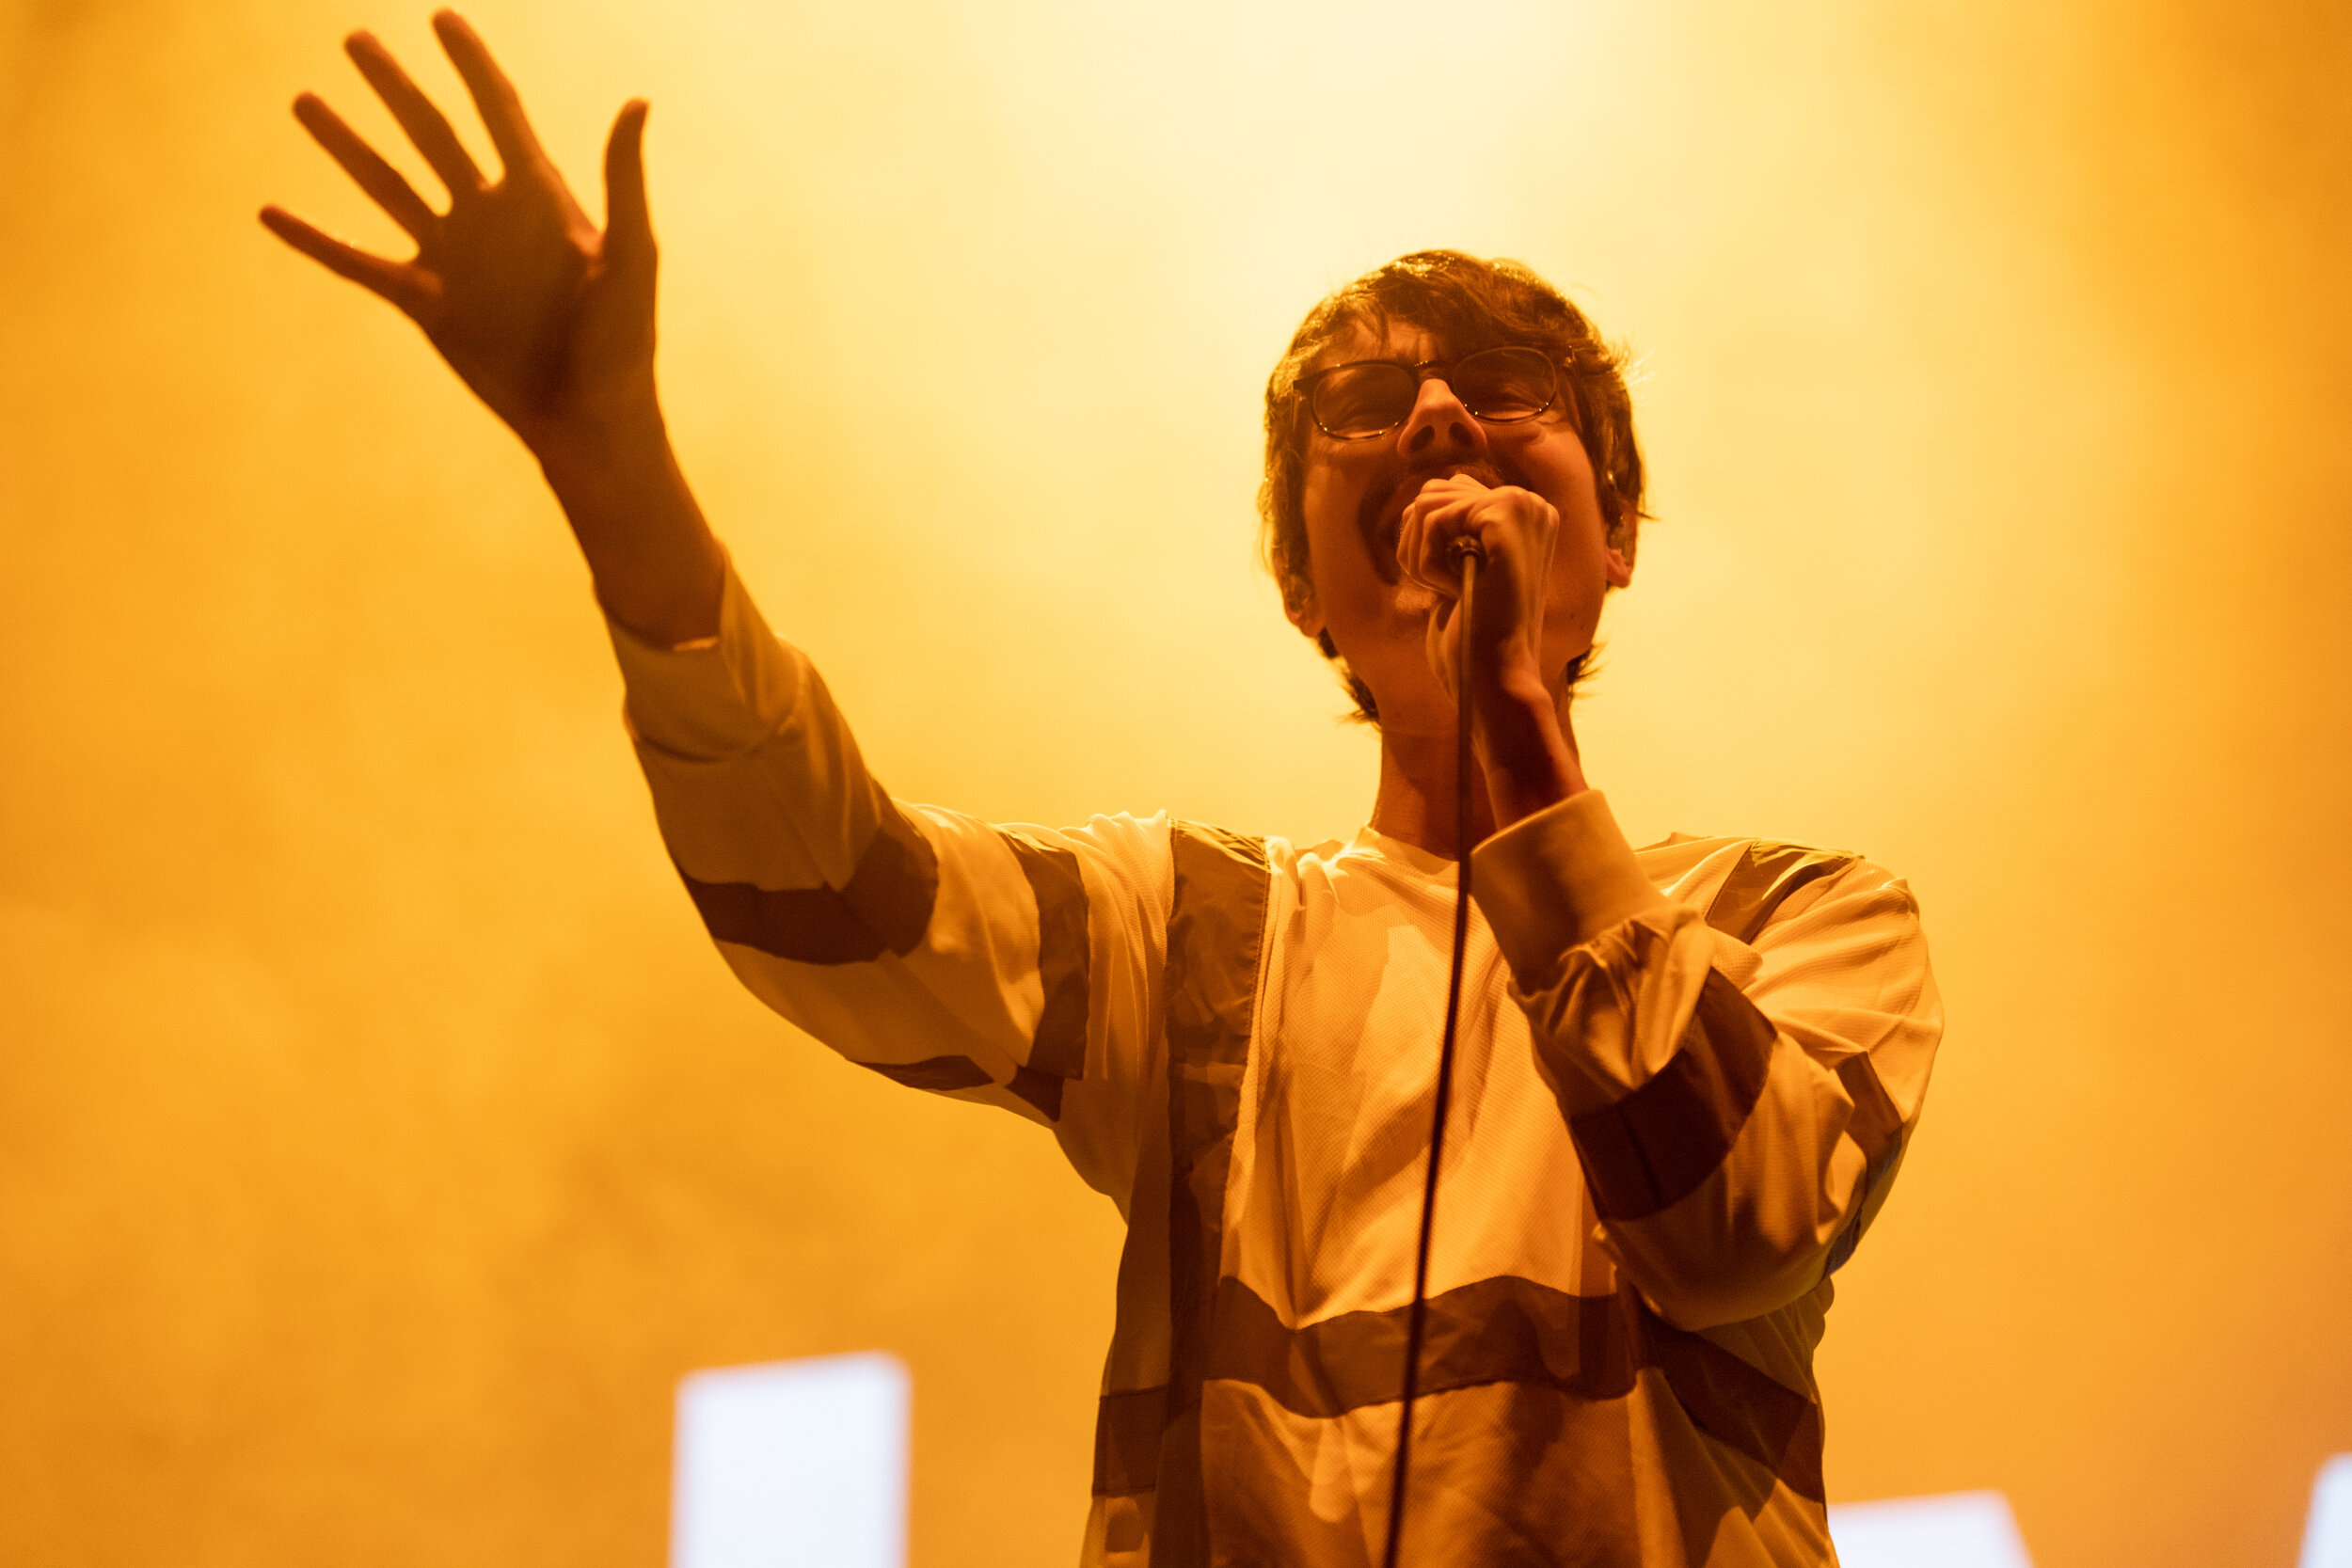  Joywave opens for Bastille at Circuit of the Americas. 